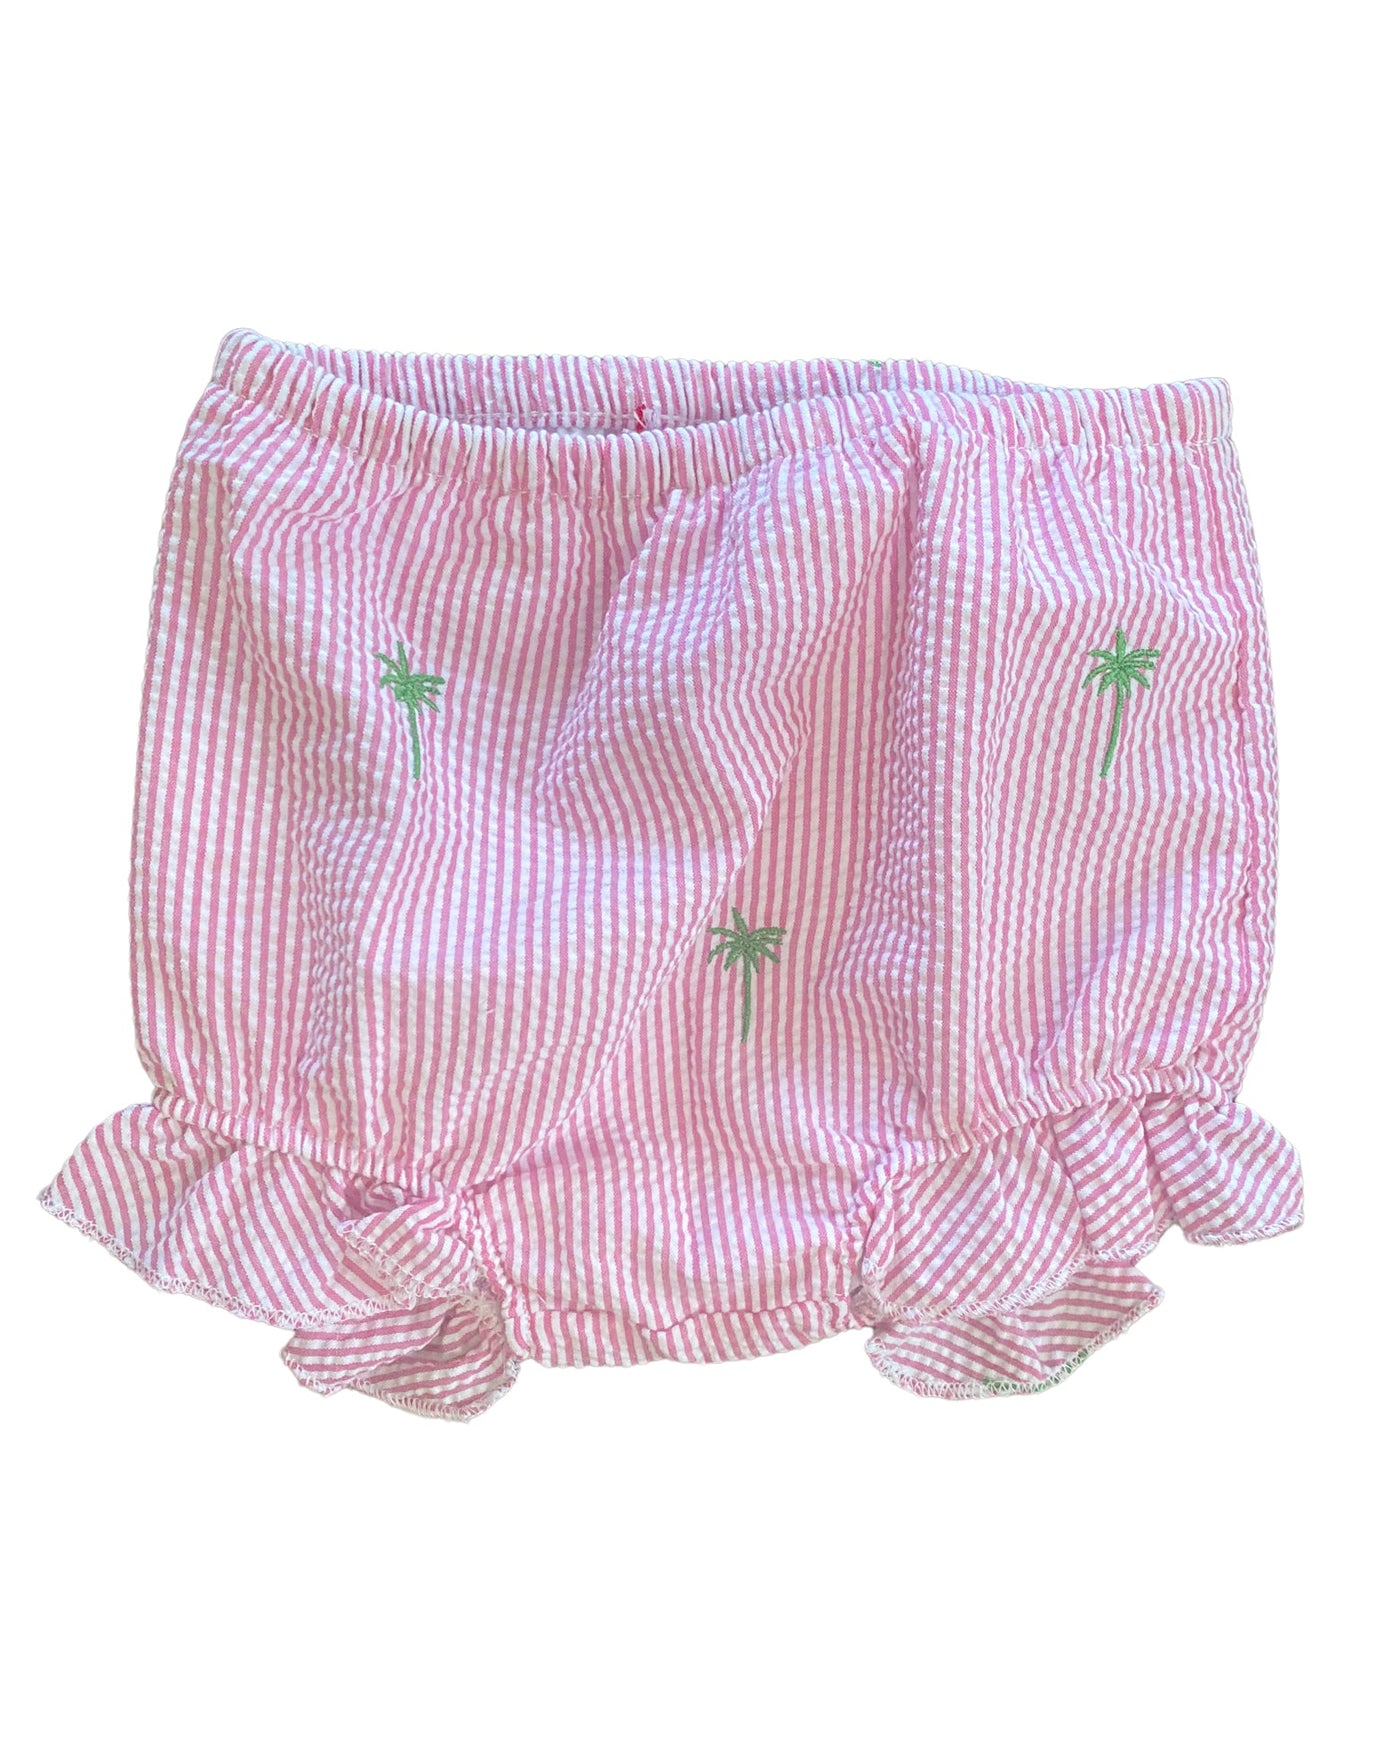 Pink Seersucker Baby Bloomers with Green Embroidered Palm Trees